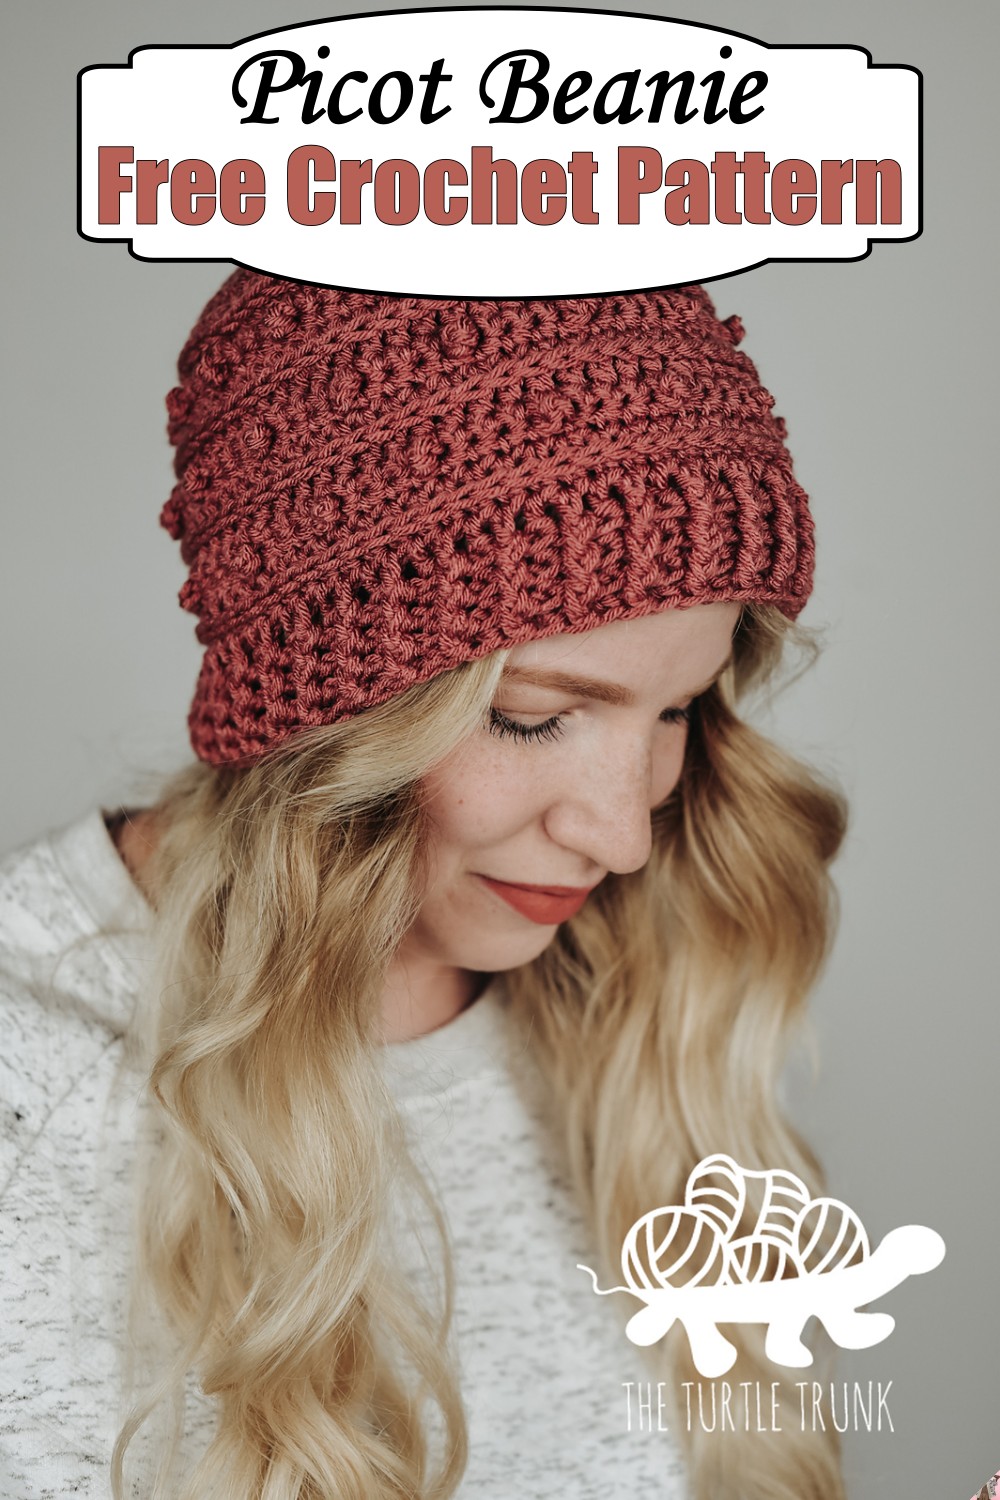 15 Crochet Bobble Stitch Hat and Beanie Patterns All Easy